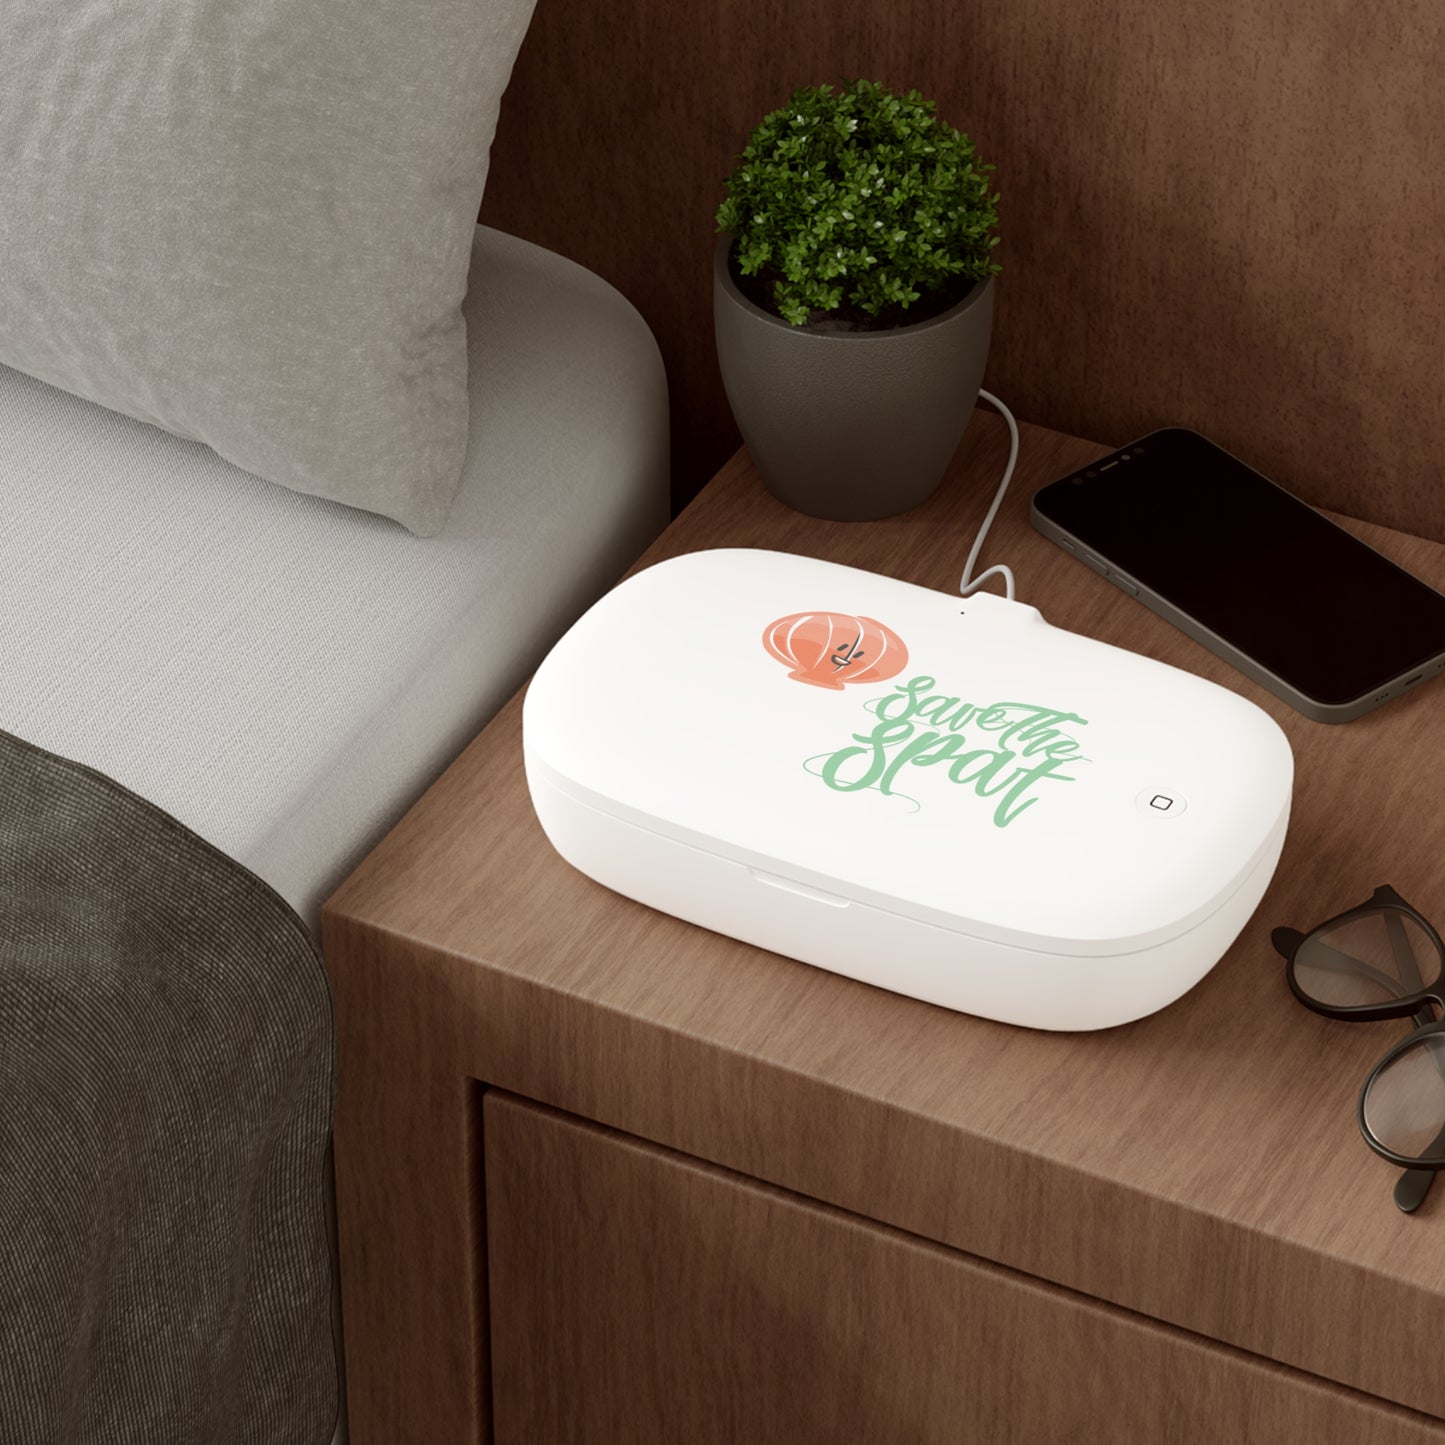 Save the Spat - Ollie Oyster UV Phone Sanitizer and Wireless Charging Pad